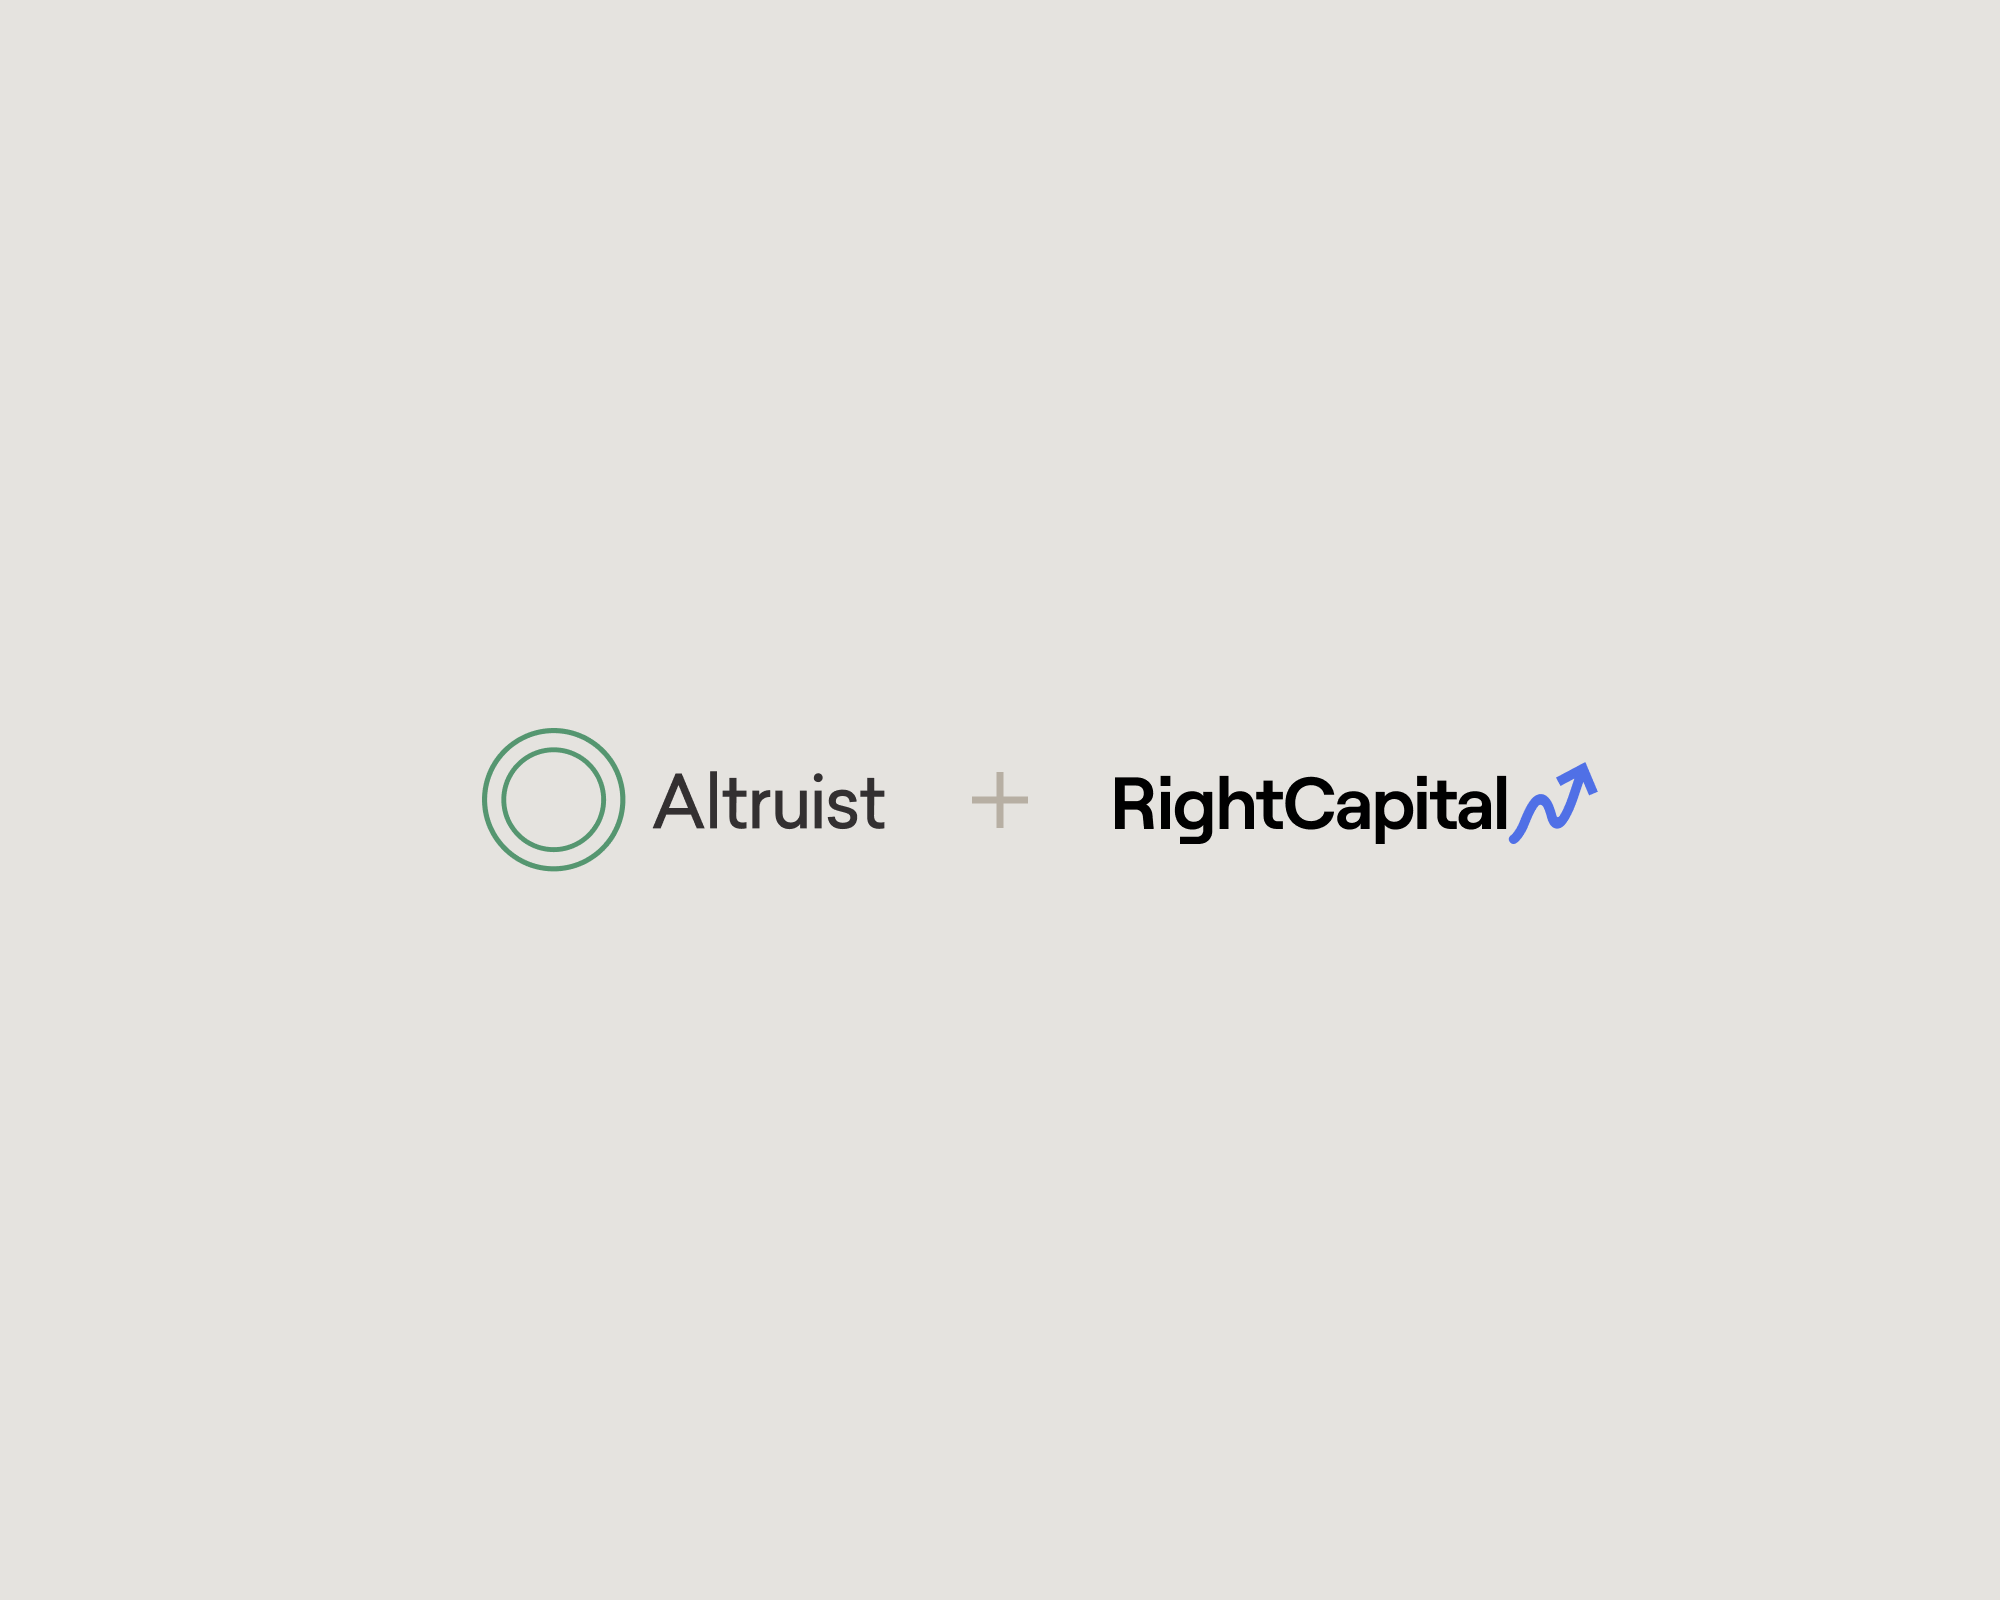 Announcing Altruist’s integration with RightCapital